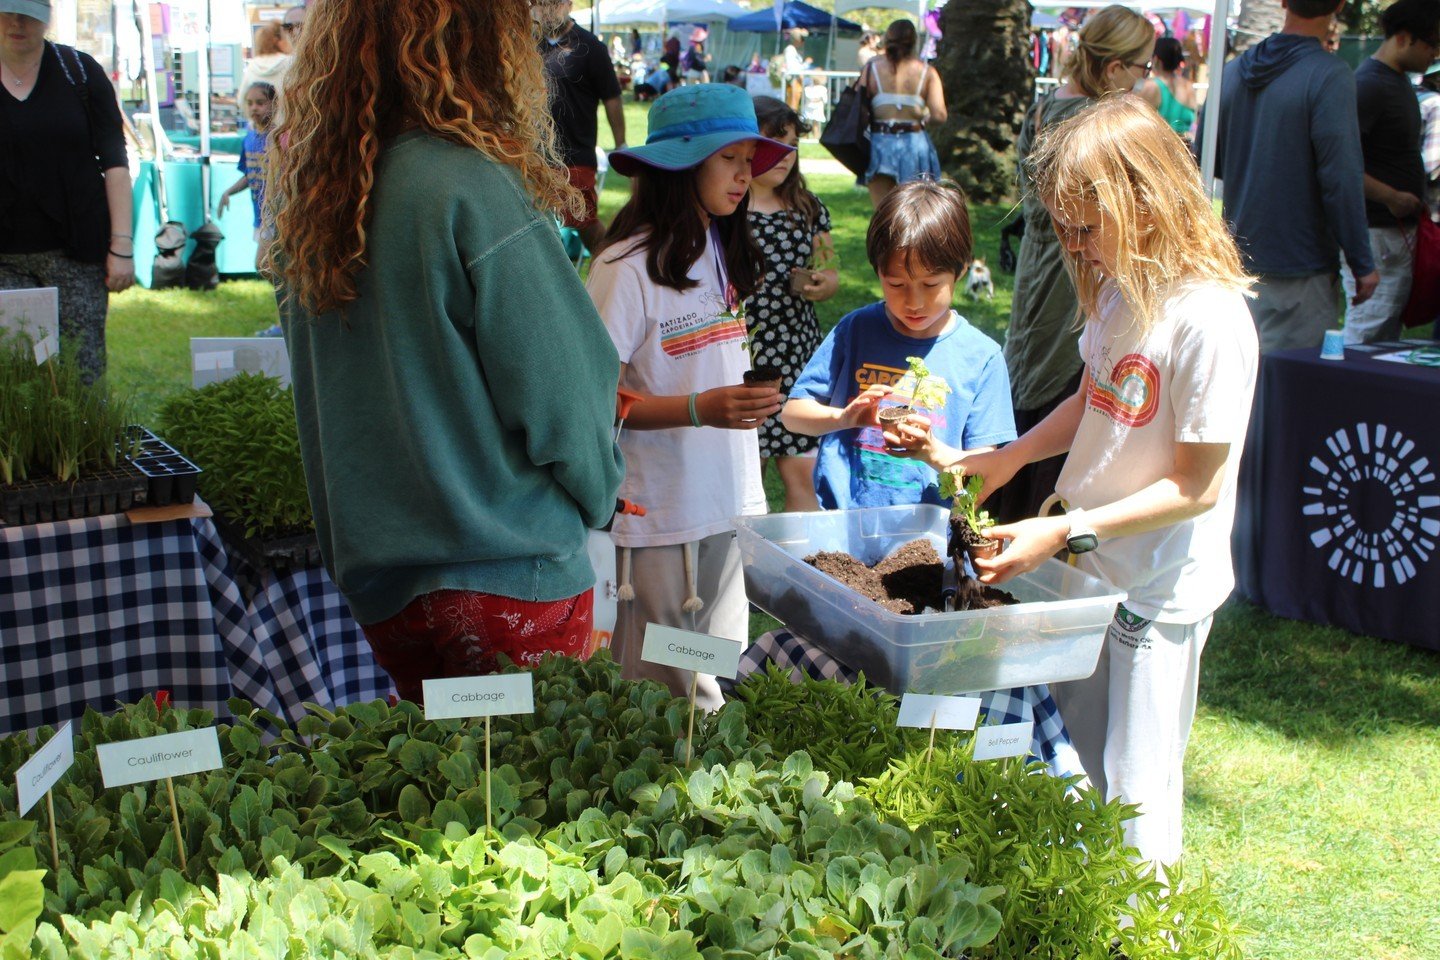 Thank you to everyone who joined us at our 2nd Annual Plantopia fundraiser this past weekend! It was wonderful to catch up with familiar faces and meet new friends. A special shoutout to @plantel_nurseries for their generous contribution of seedlings